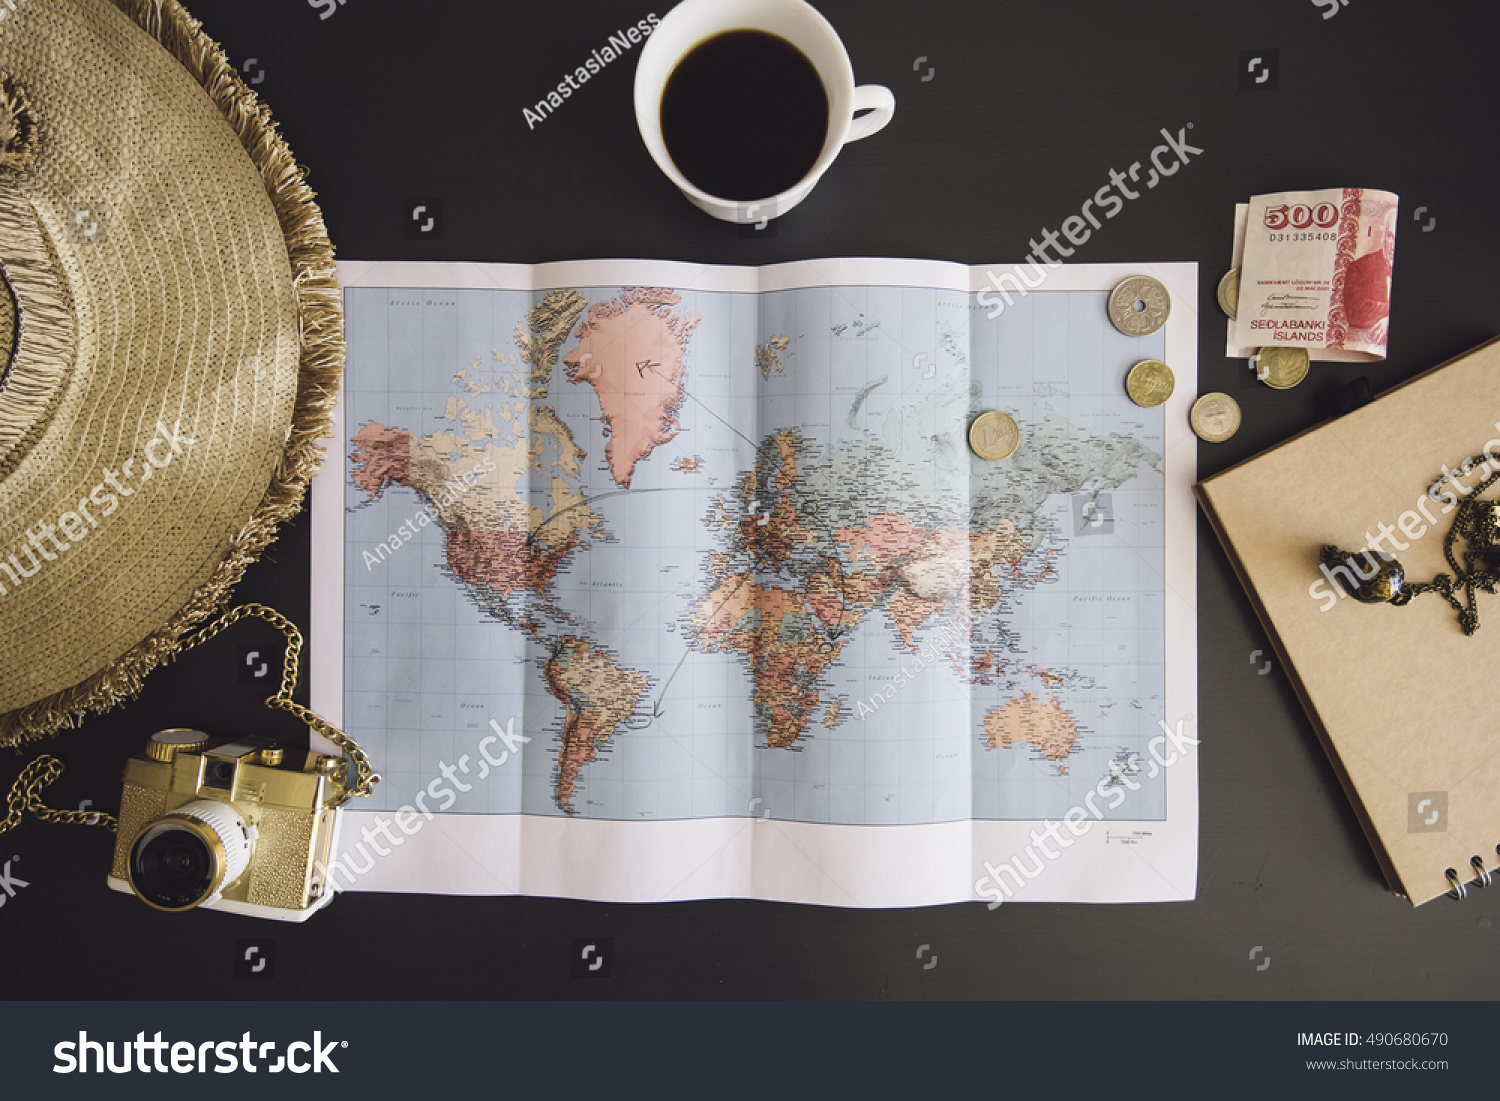 Planning the trip. World map with the hat, film camera, some money, notebook from recycled paper and freshly brewed coffee cup on the dark wooden table background. #490680670